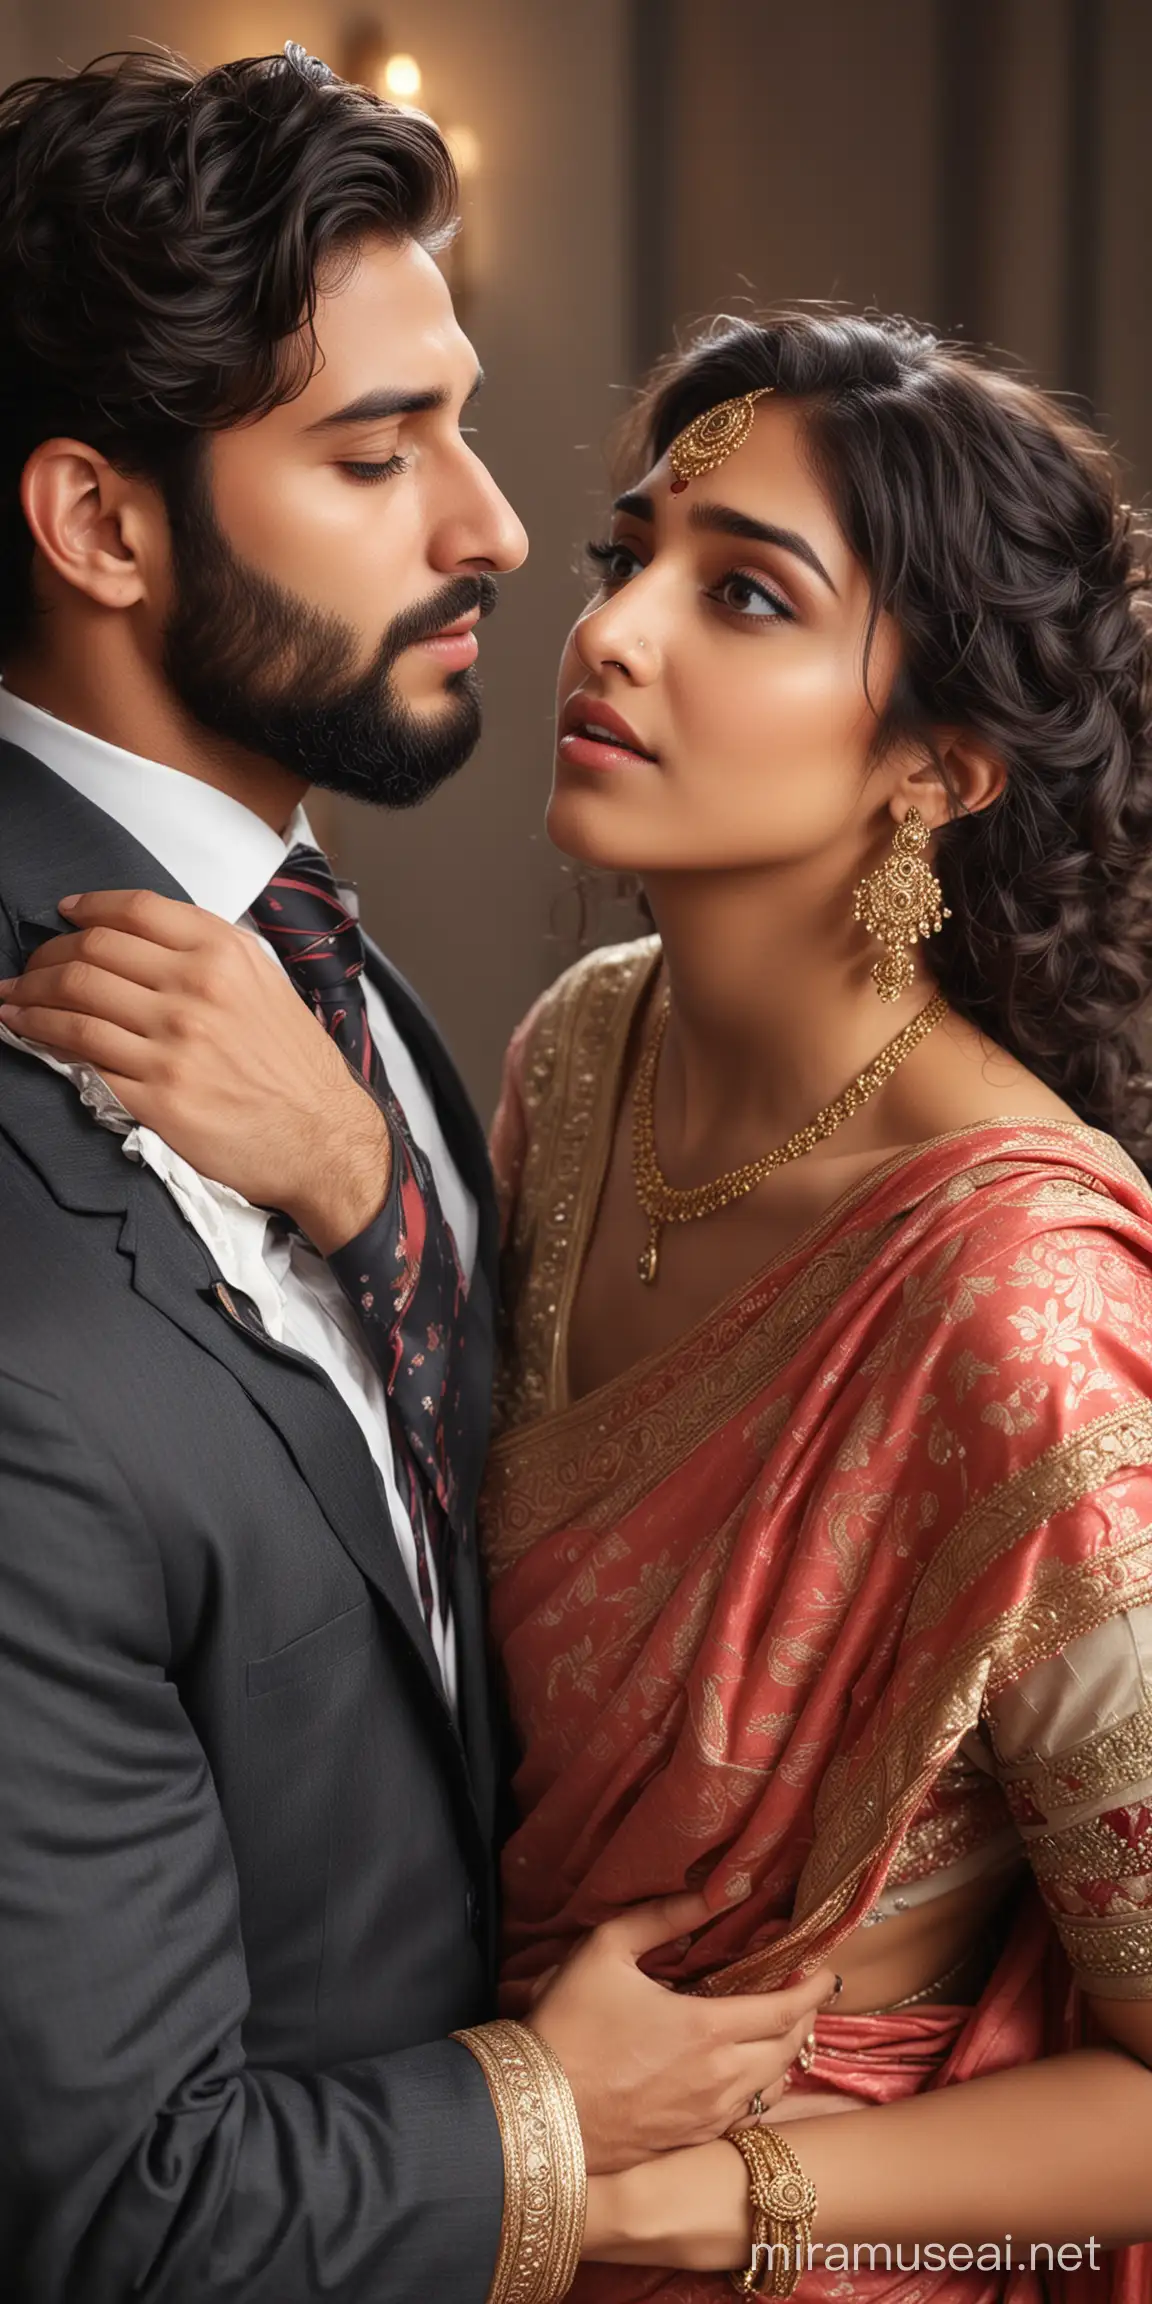 couple, most handsome full body photo of  elegant european male,  formals with tie,  elegant looks,  beard,  most beautiful cute indian girl, elegant saree, low cut back, makeup, curly long hair,  girl head resting on man's chest  with emotional  reunited feeling, girl emotional and crying, emotionally weeping with bursting in tears,  as reunited, low cut back, man comforting girl, 
photo realistic, 4k.